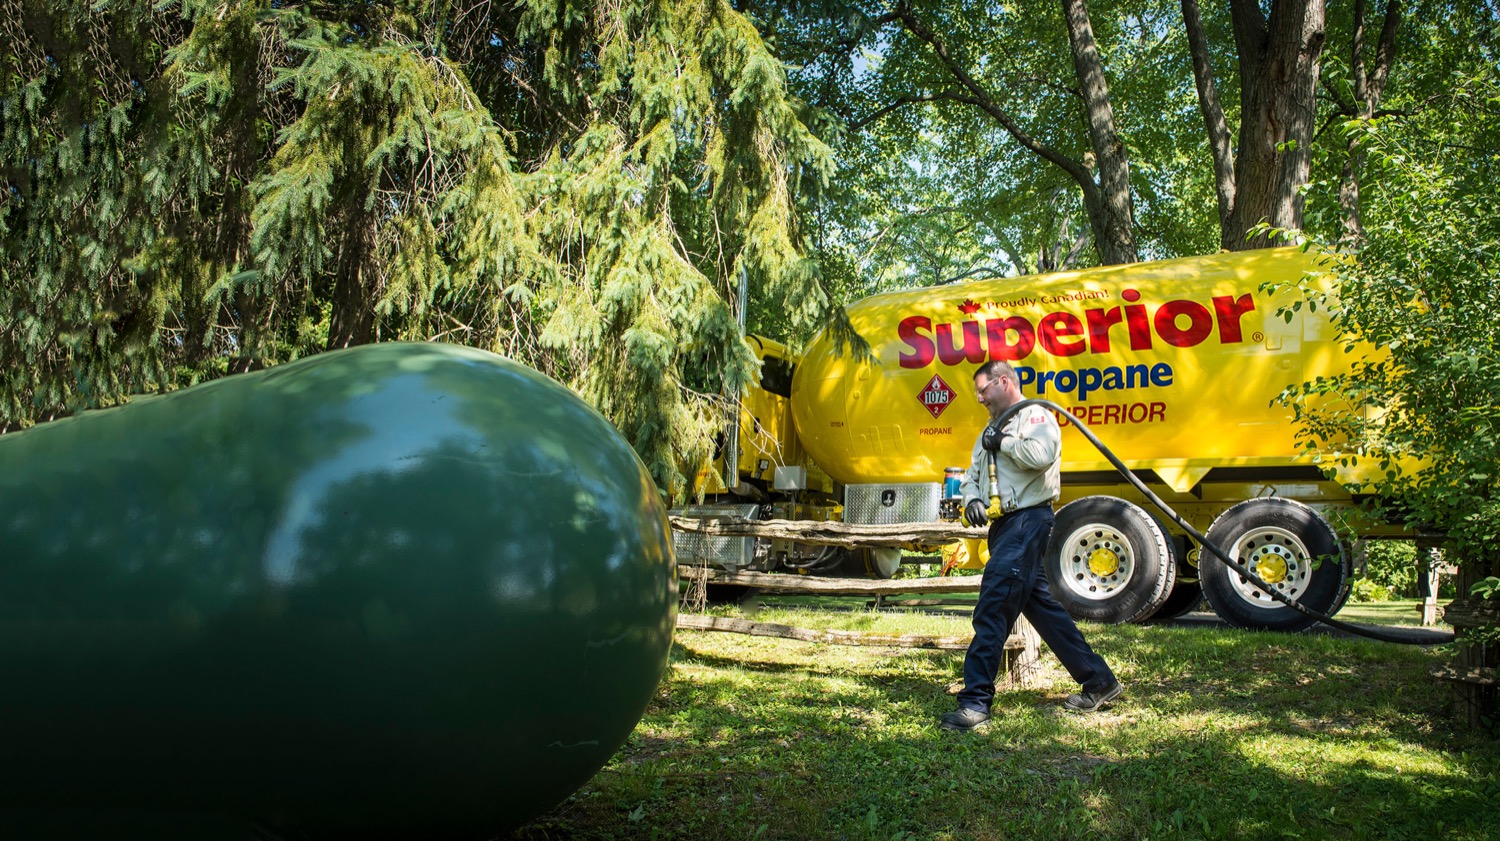 Superior Propane, Propane Supplier for your Home